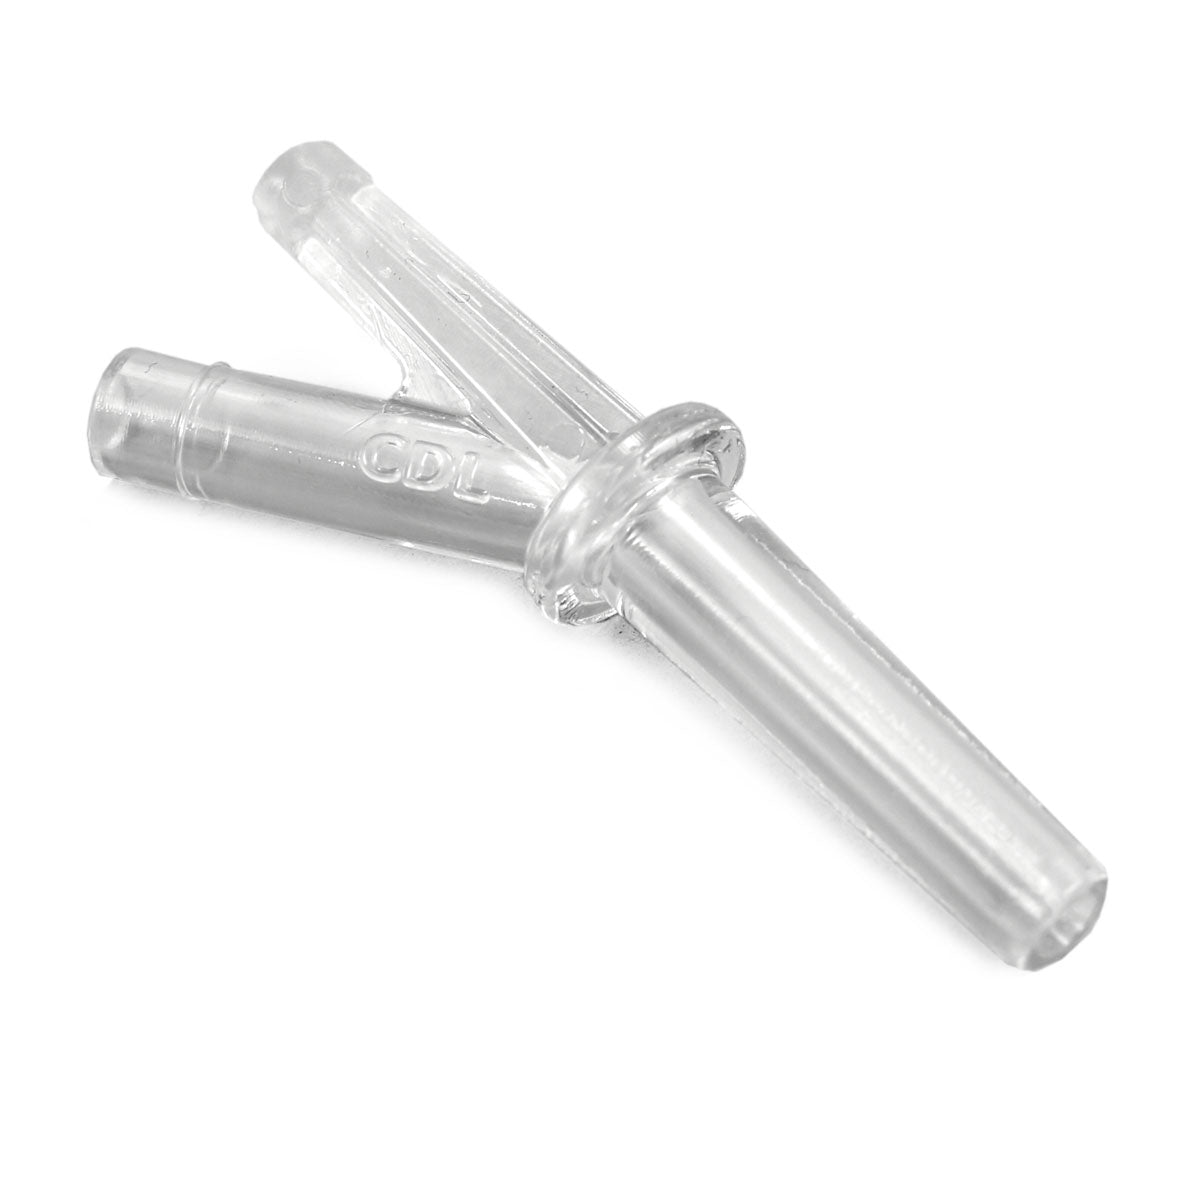 CDL 5/16" Clear "Signature Spout" (for one year use)